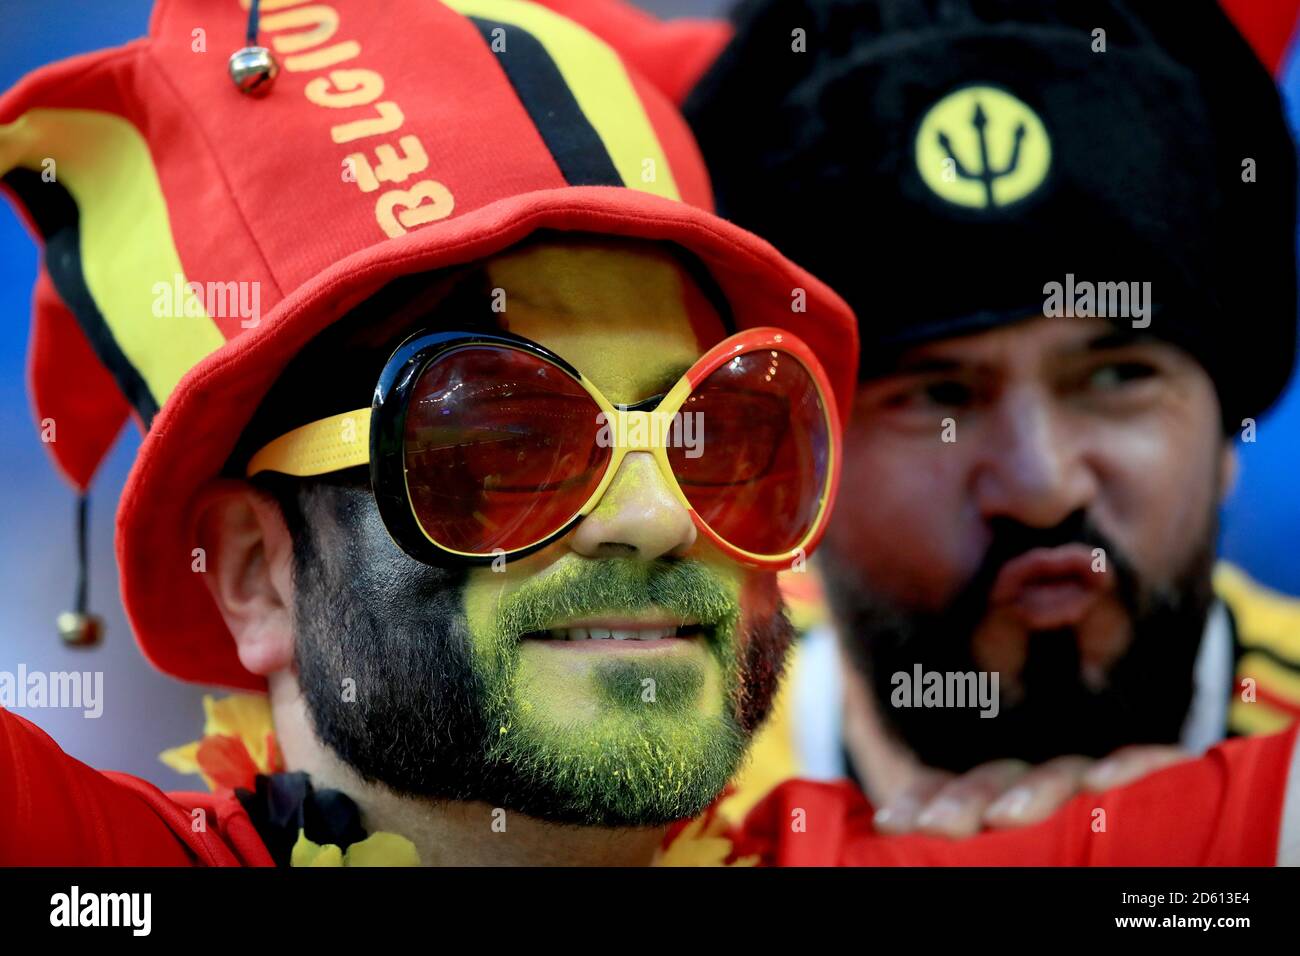 A Belgium fan shows support for his team in the stands Stock Photo